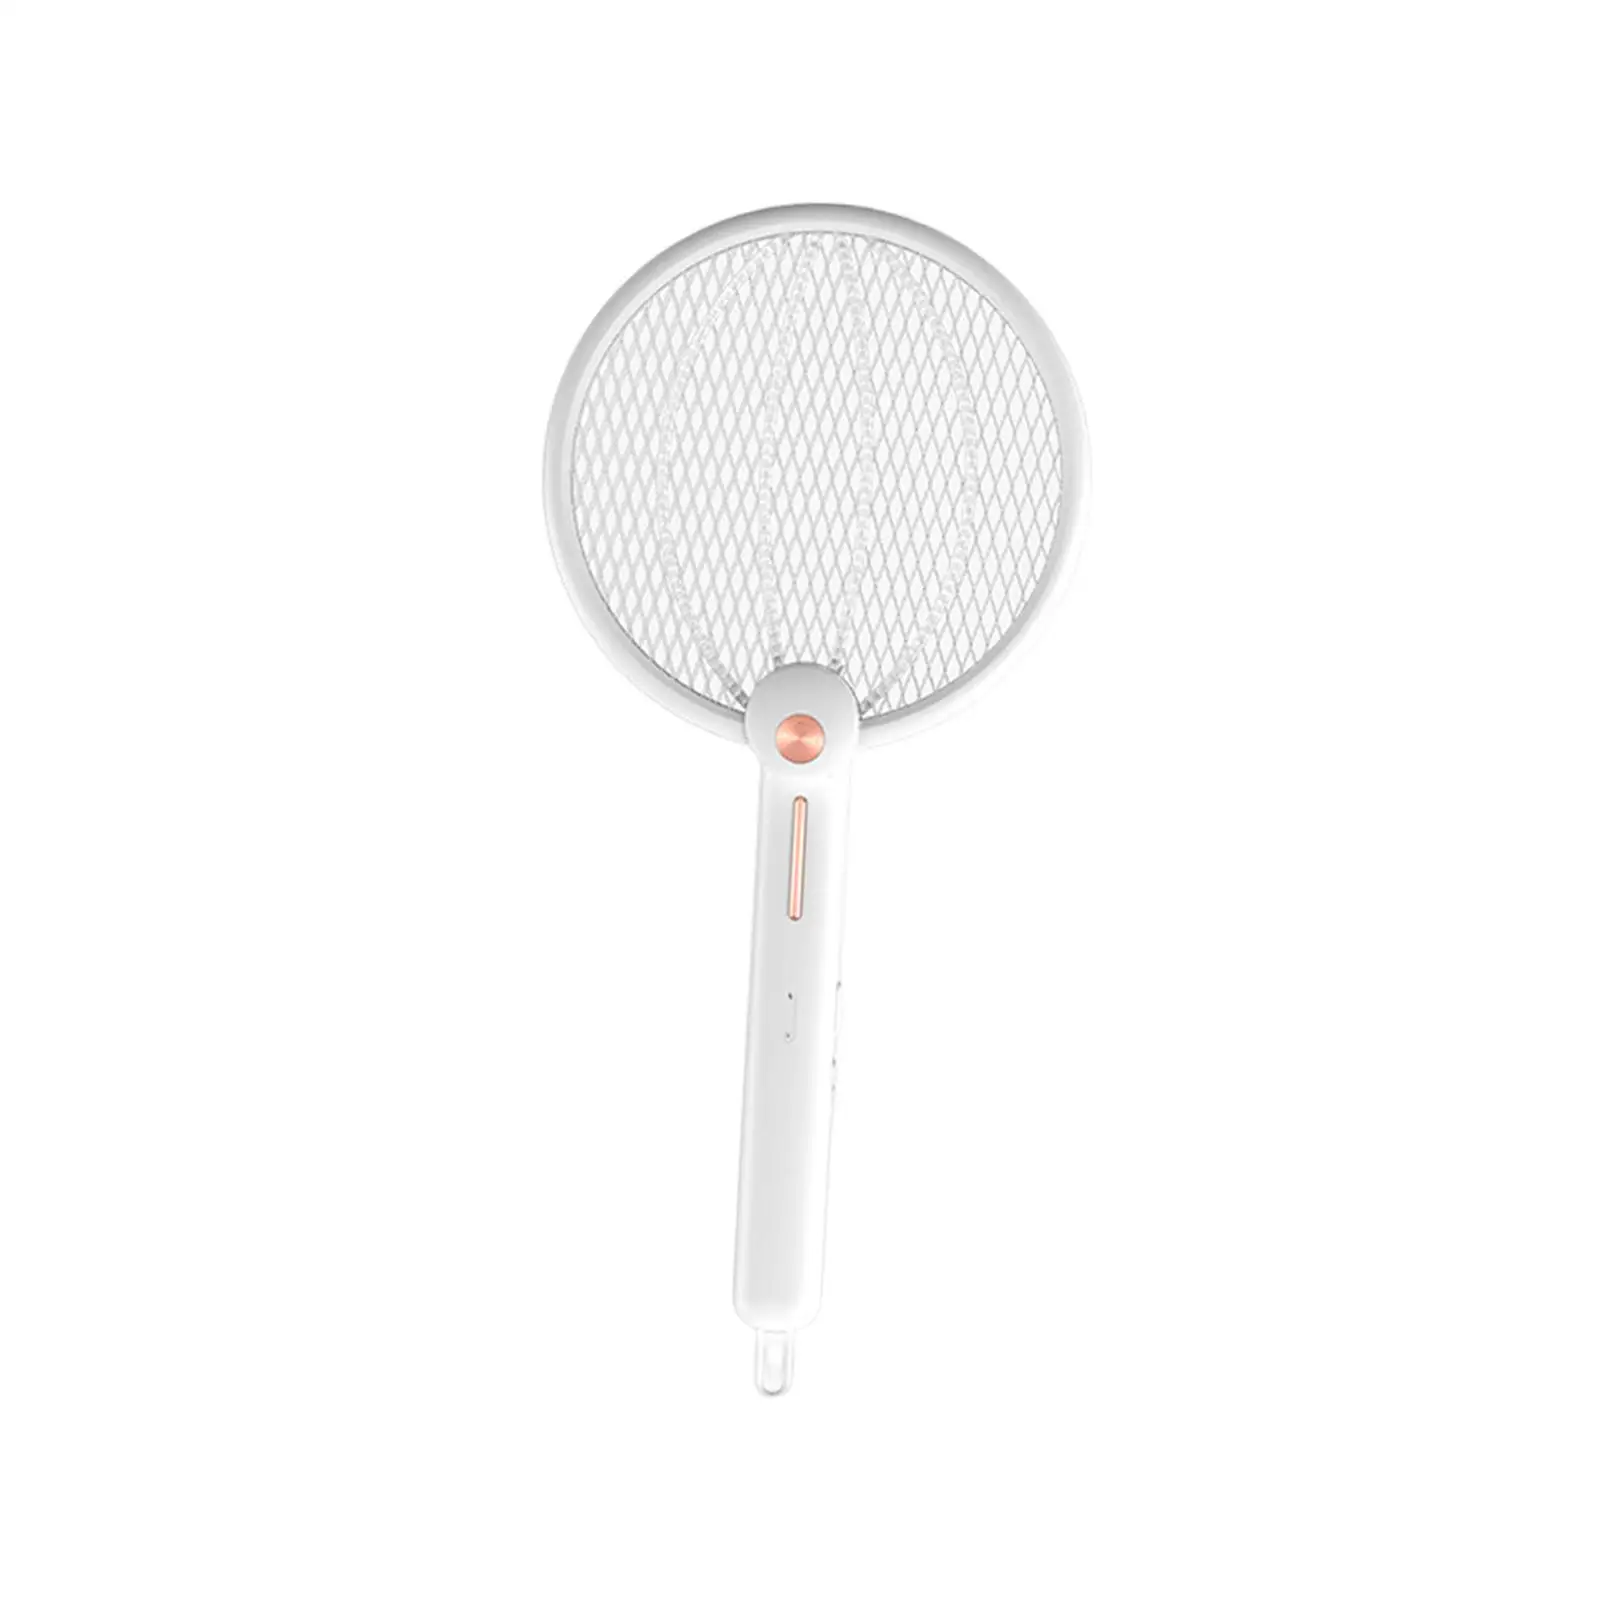 Electric Fly Swatter Racket Powerful USB 3000V Replaceable Fly traps Lamp Fly Swatter for Summer Indoor Kitchen Household Office